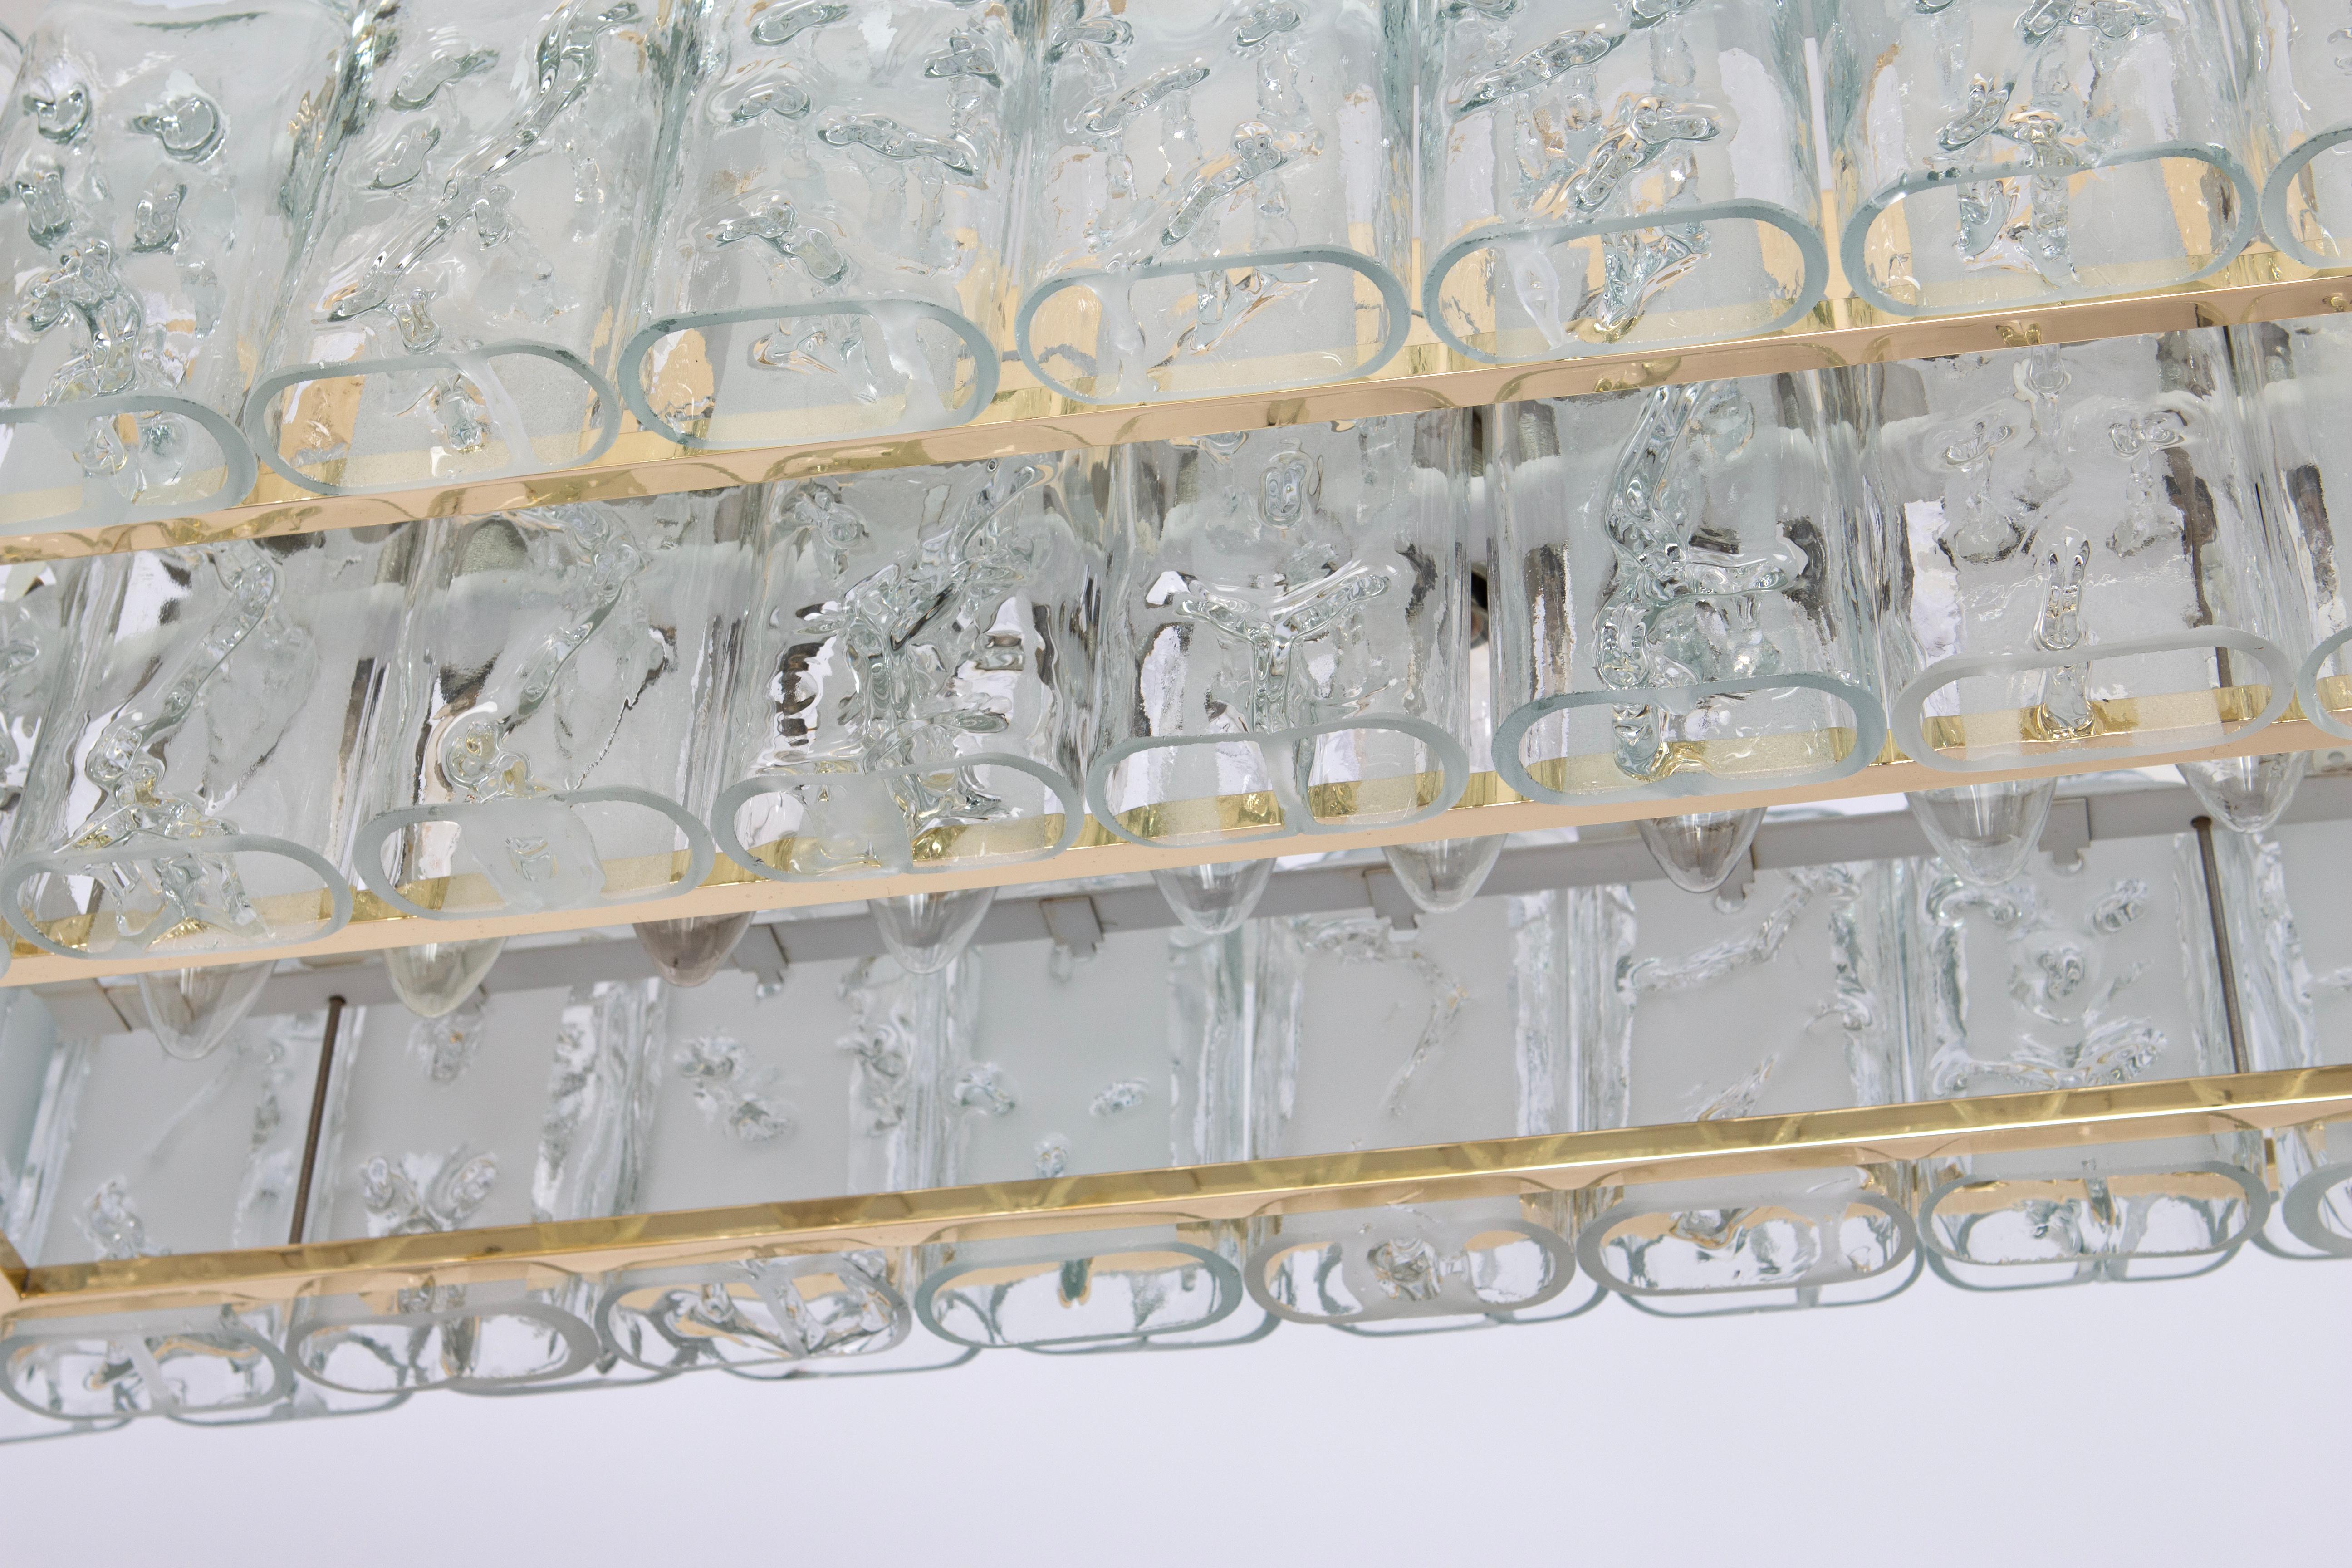 Large Doria Ice Glass Tubes Chandelier, Germany, 1960s For Sale 2